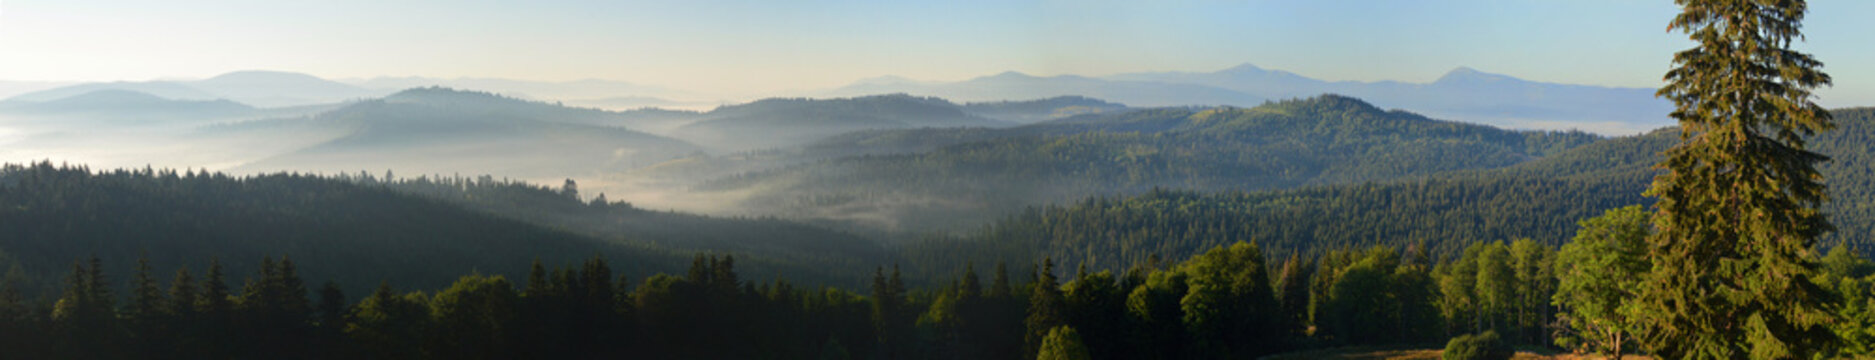 Sun rising over the mountains; panoramic view. Silhouettes of mountain peaks and morning fog. Dense forest in the foreground.